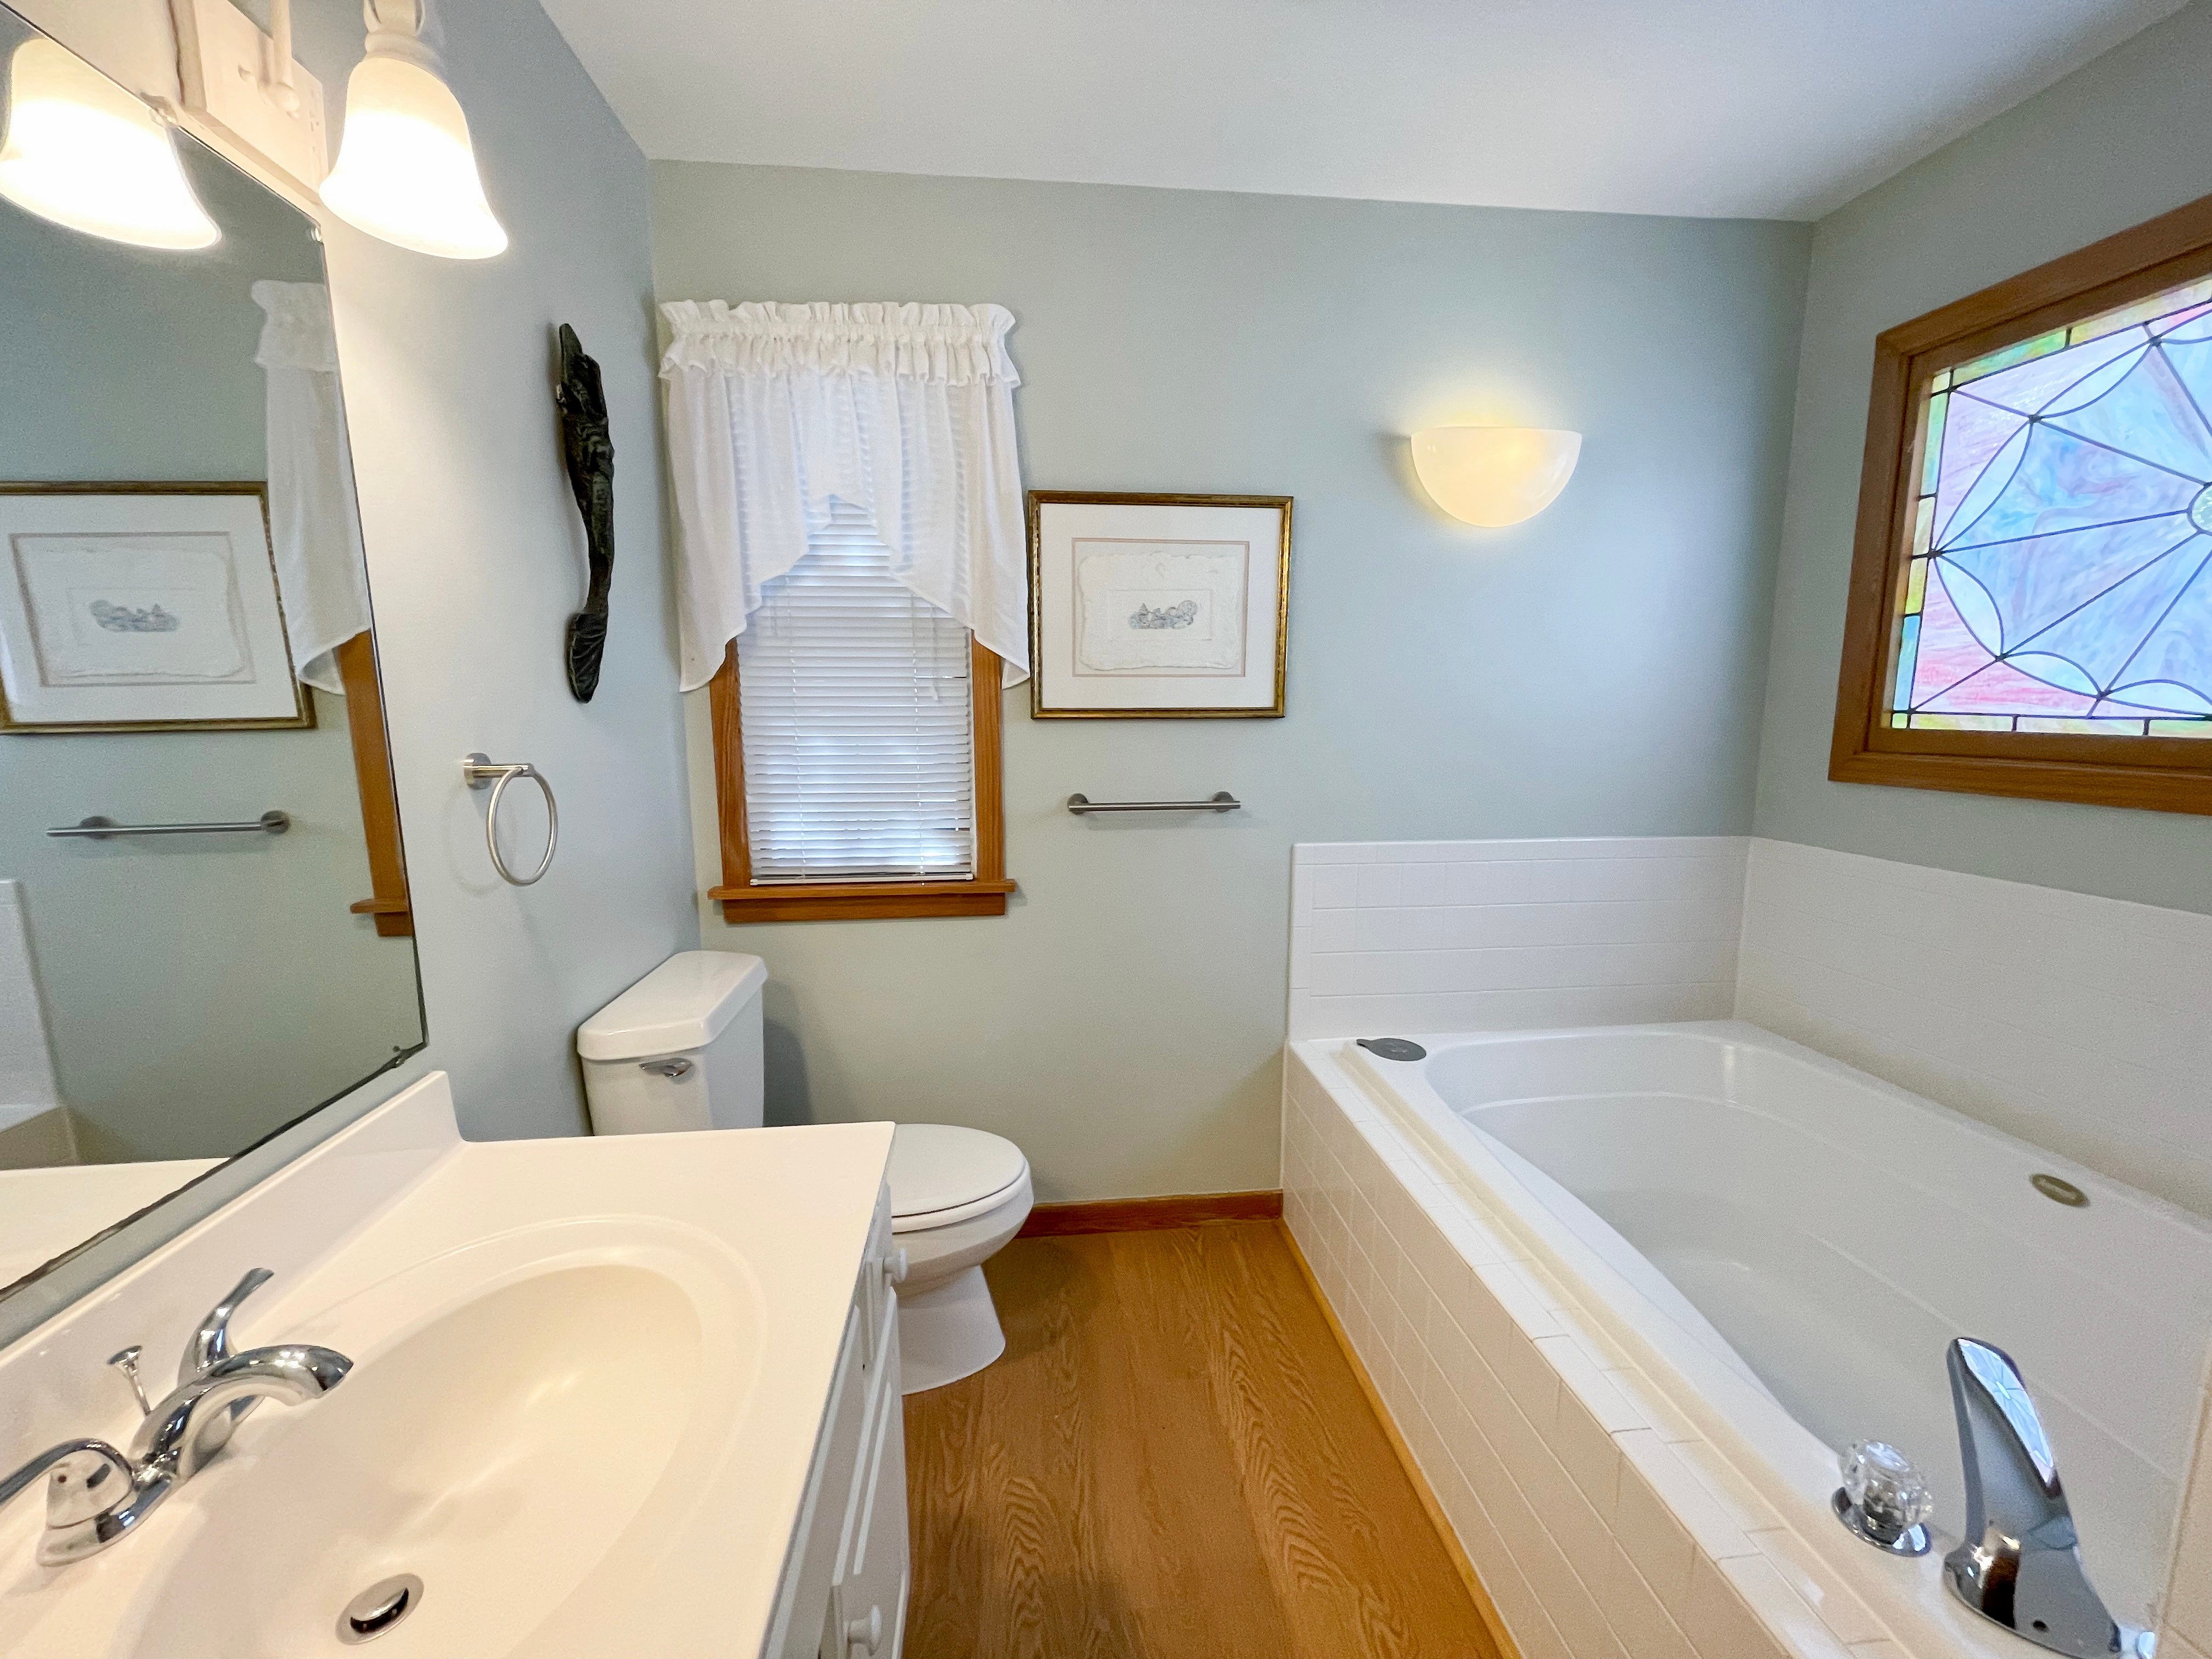 Bath with Garden Tub and Separate Shower, First Floor